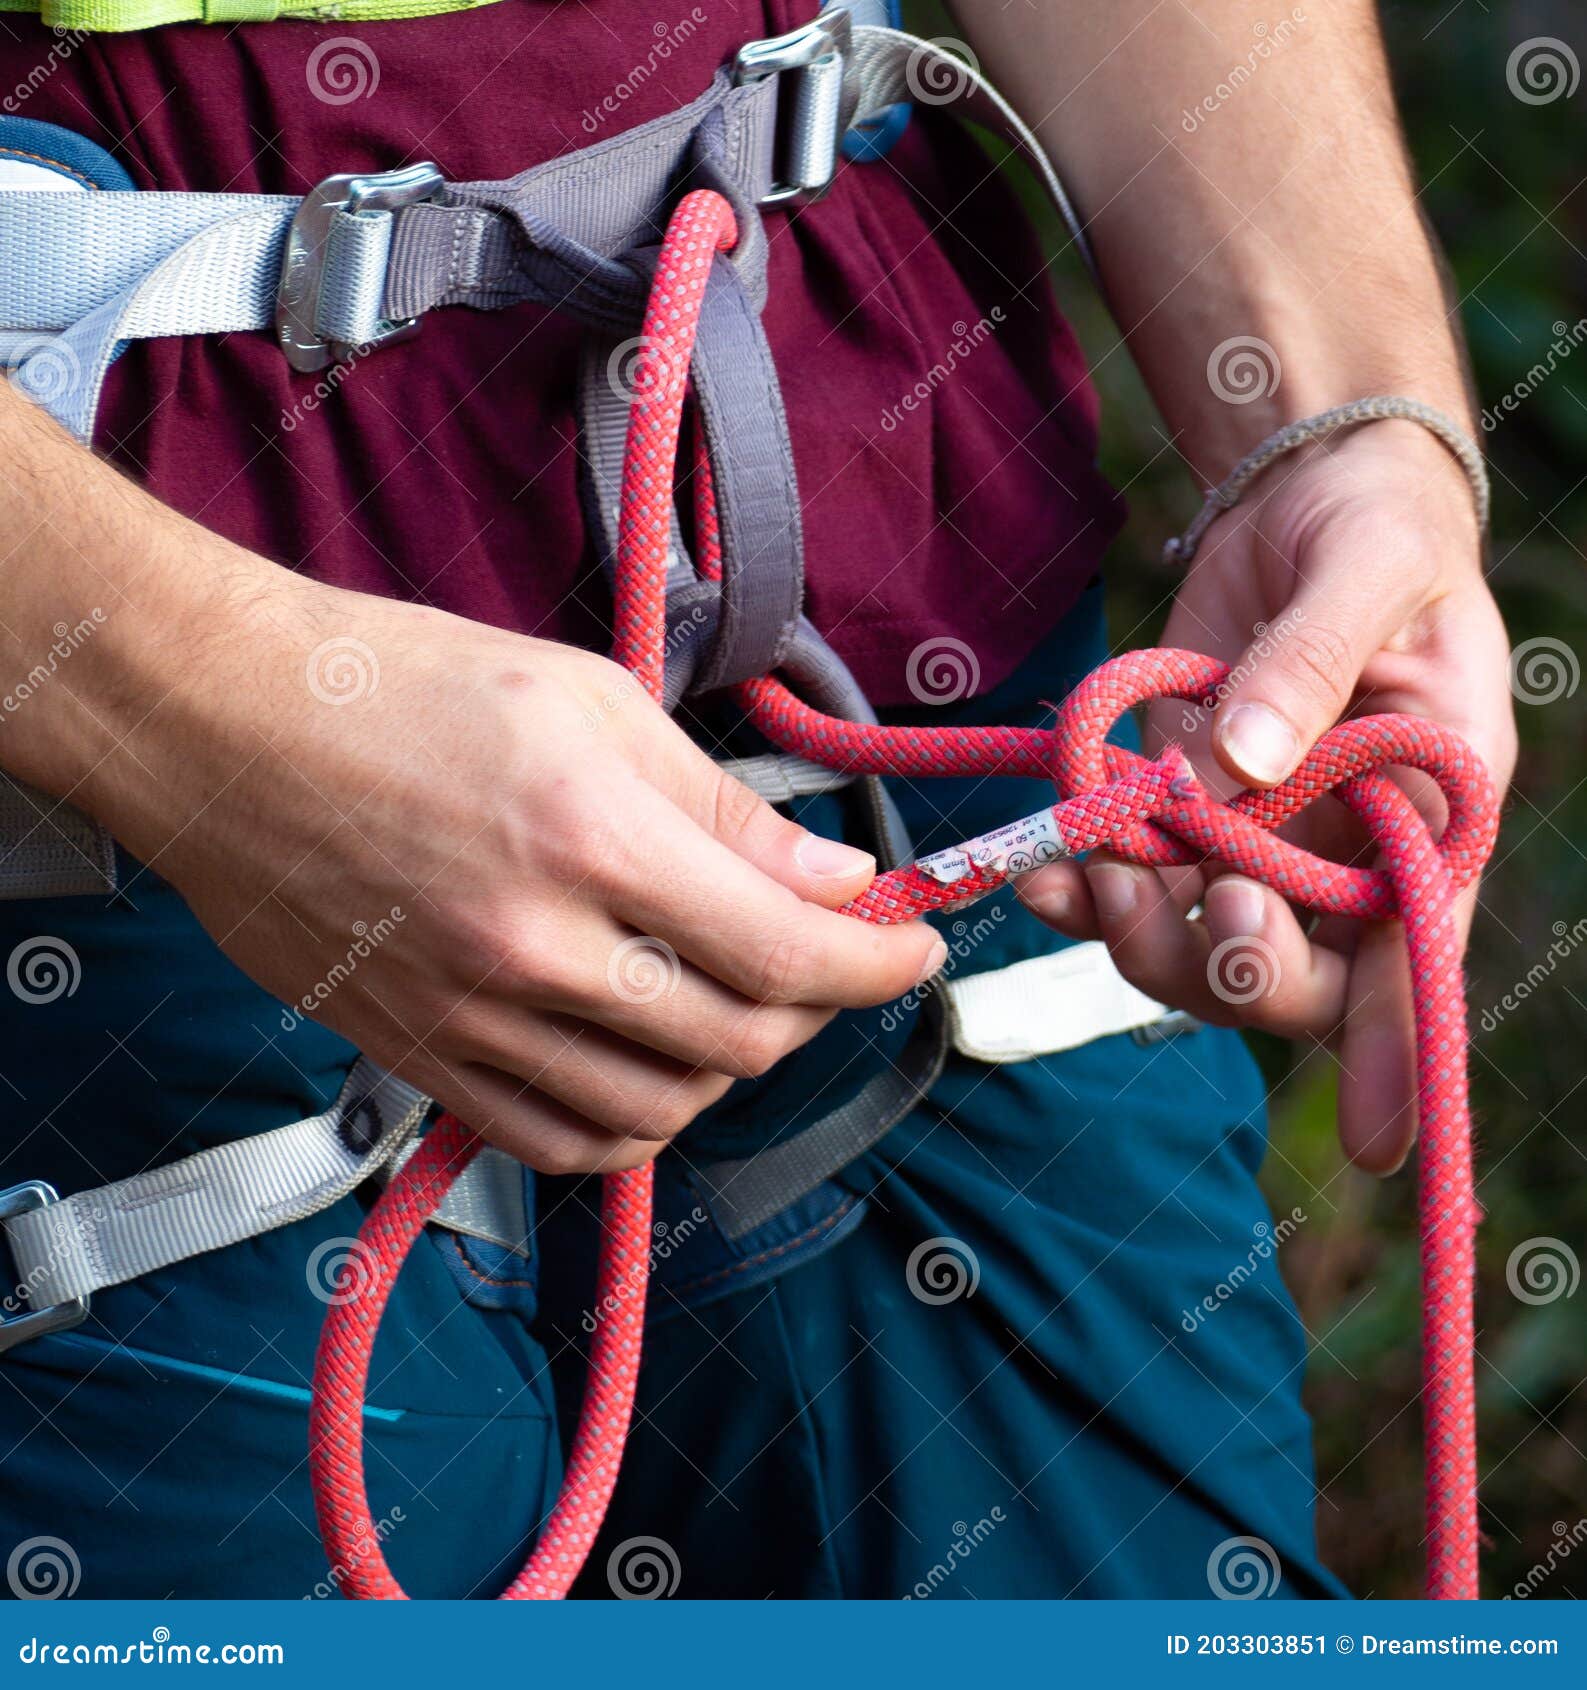 Rock Climber Wearing Safety Harness with Rope with Climbing Eight Knot  Stock Image - Image of climbing, hiking: 203303851